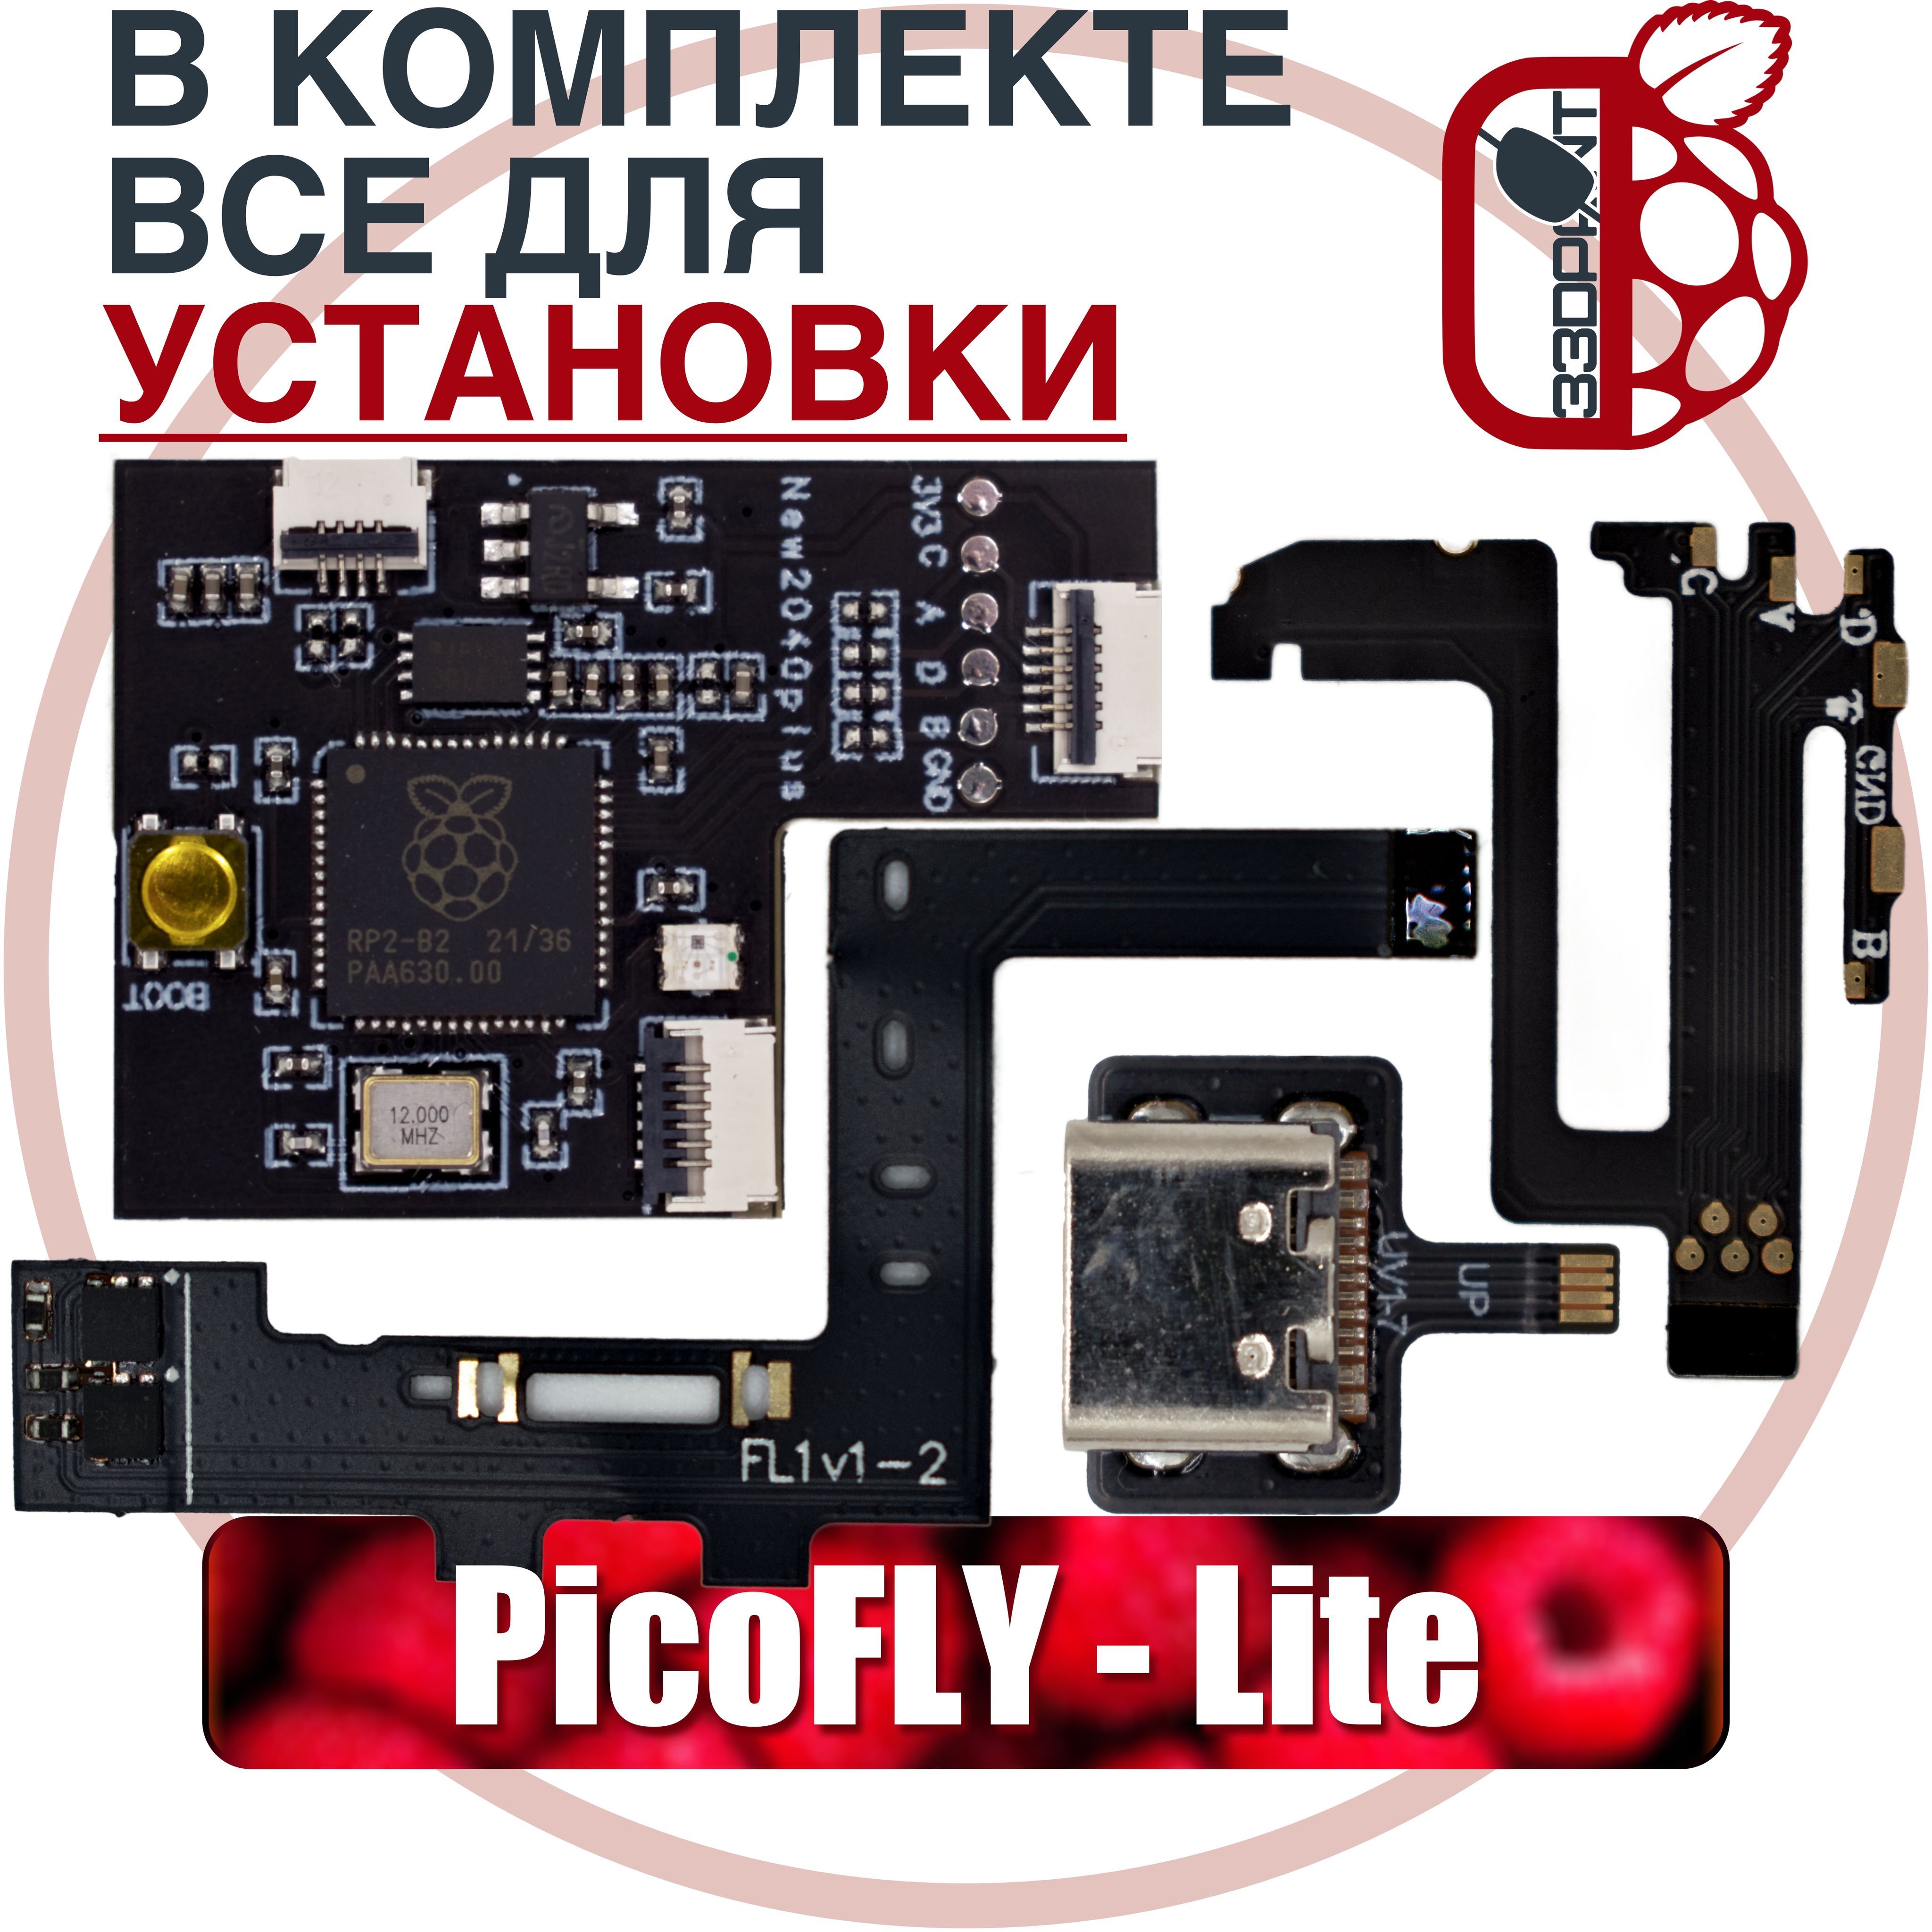 Picofly rp2040. HWFLY rp2040 Lite. Picofly Switch. Picofly Nintendo. Picofly nintendo switch